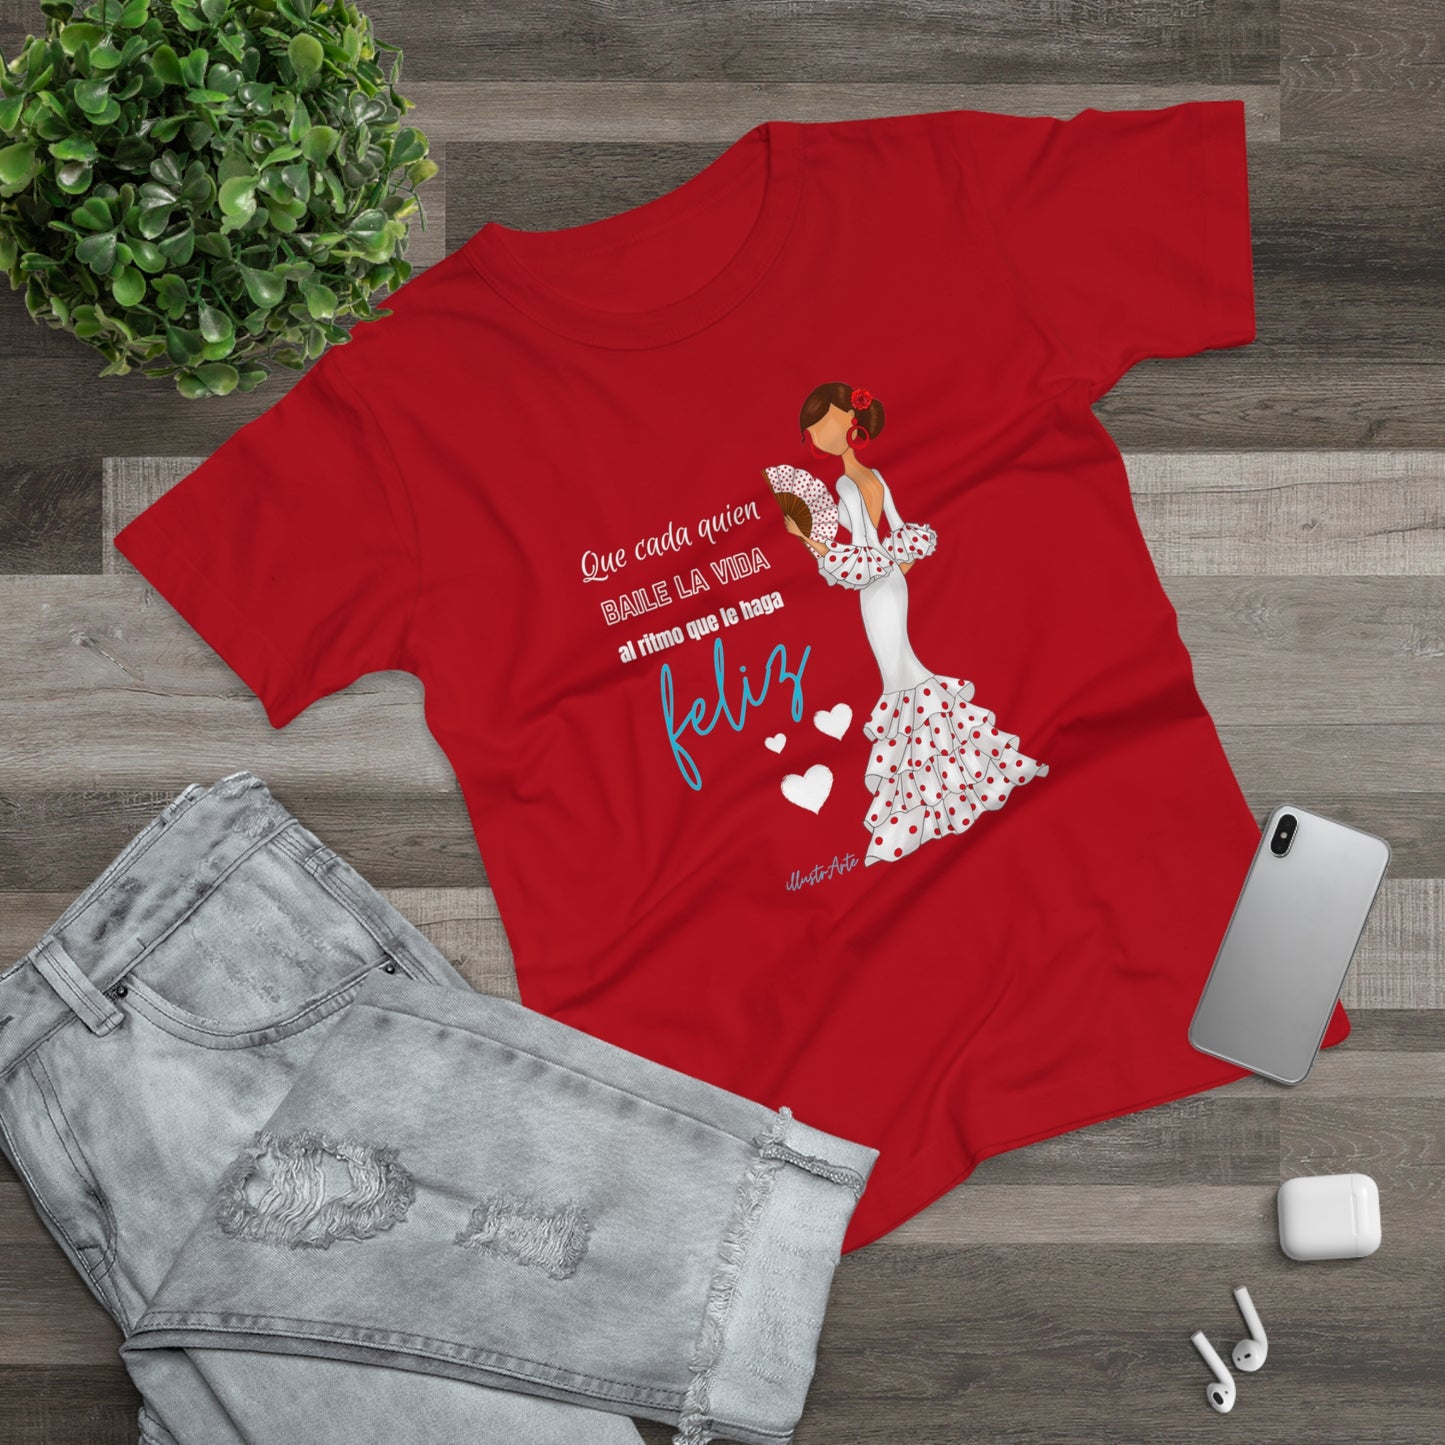 Flamenco Lovers Women's cotton red tee - Flamenca Pepa in a white dress with a positive quote.